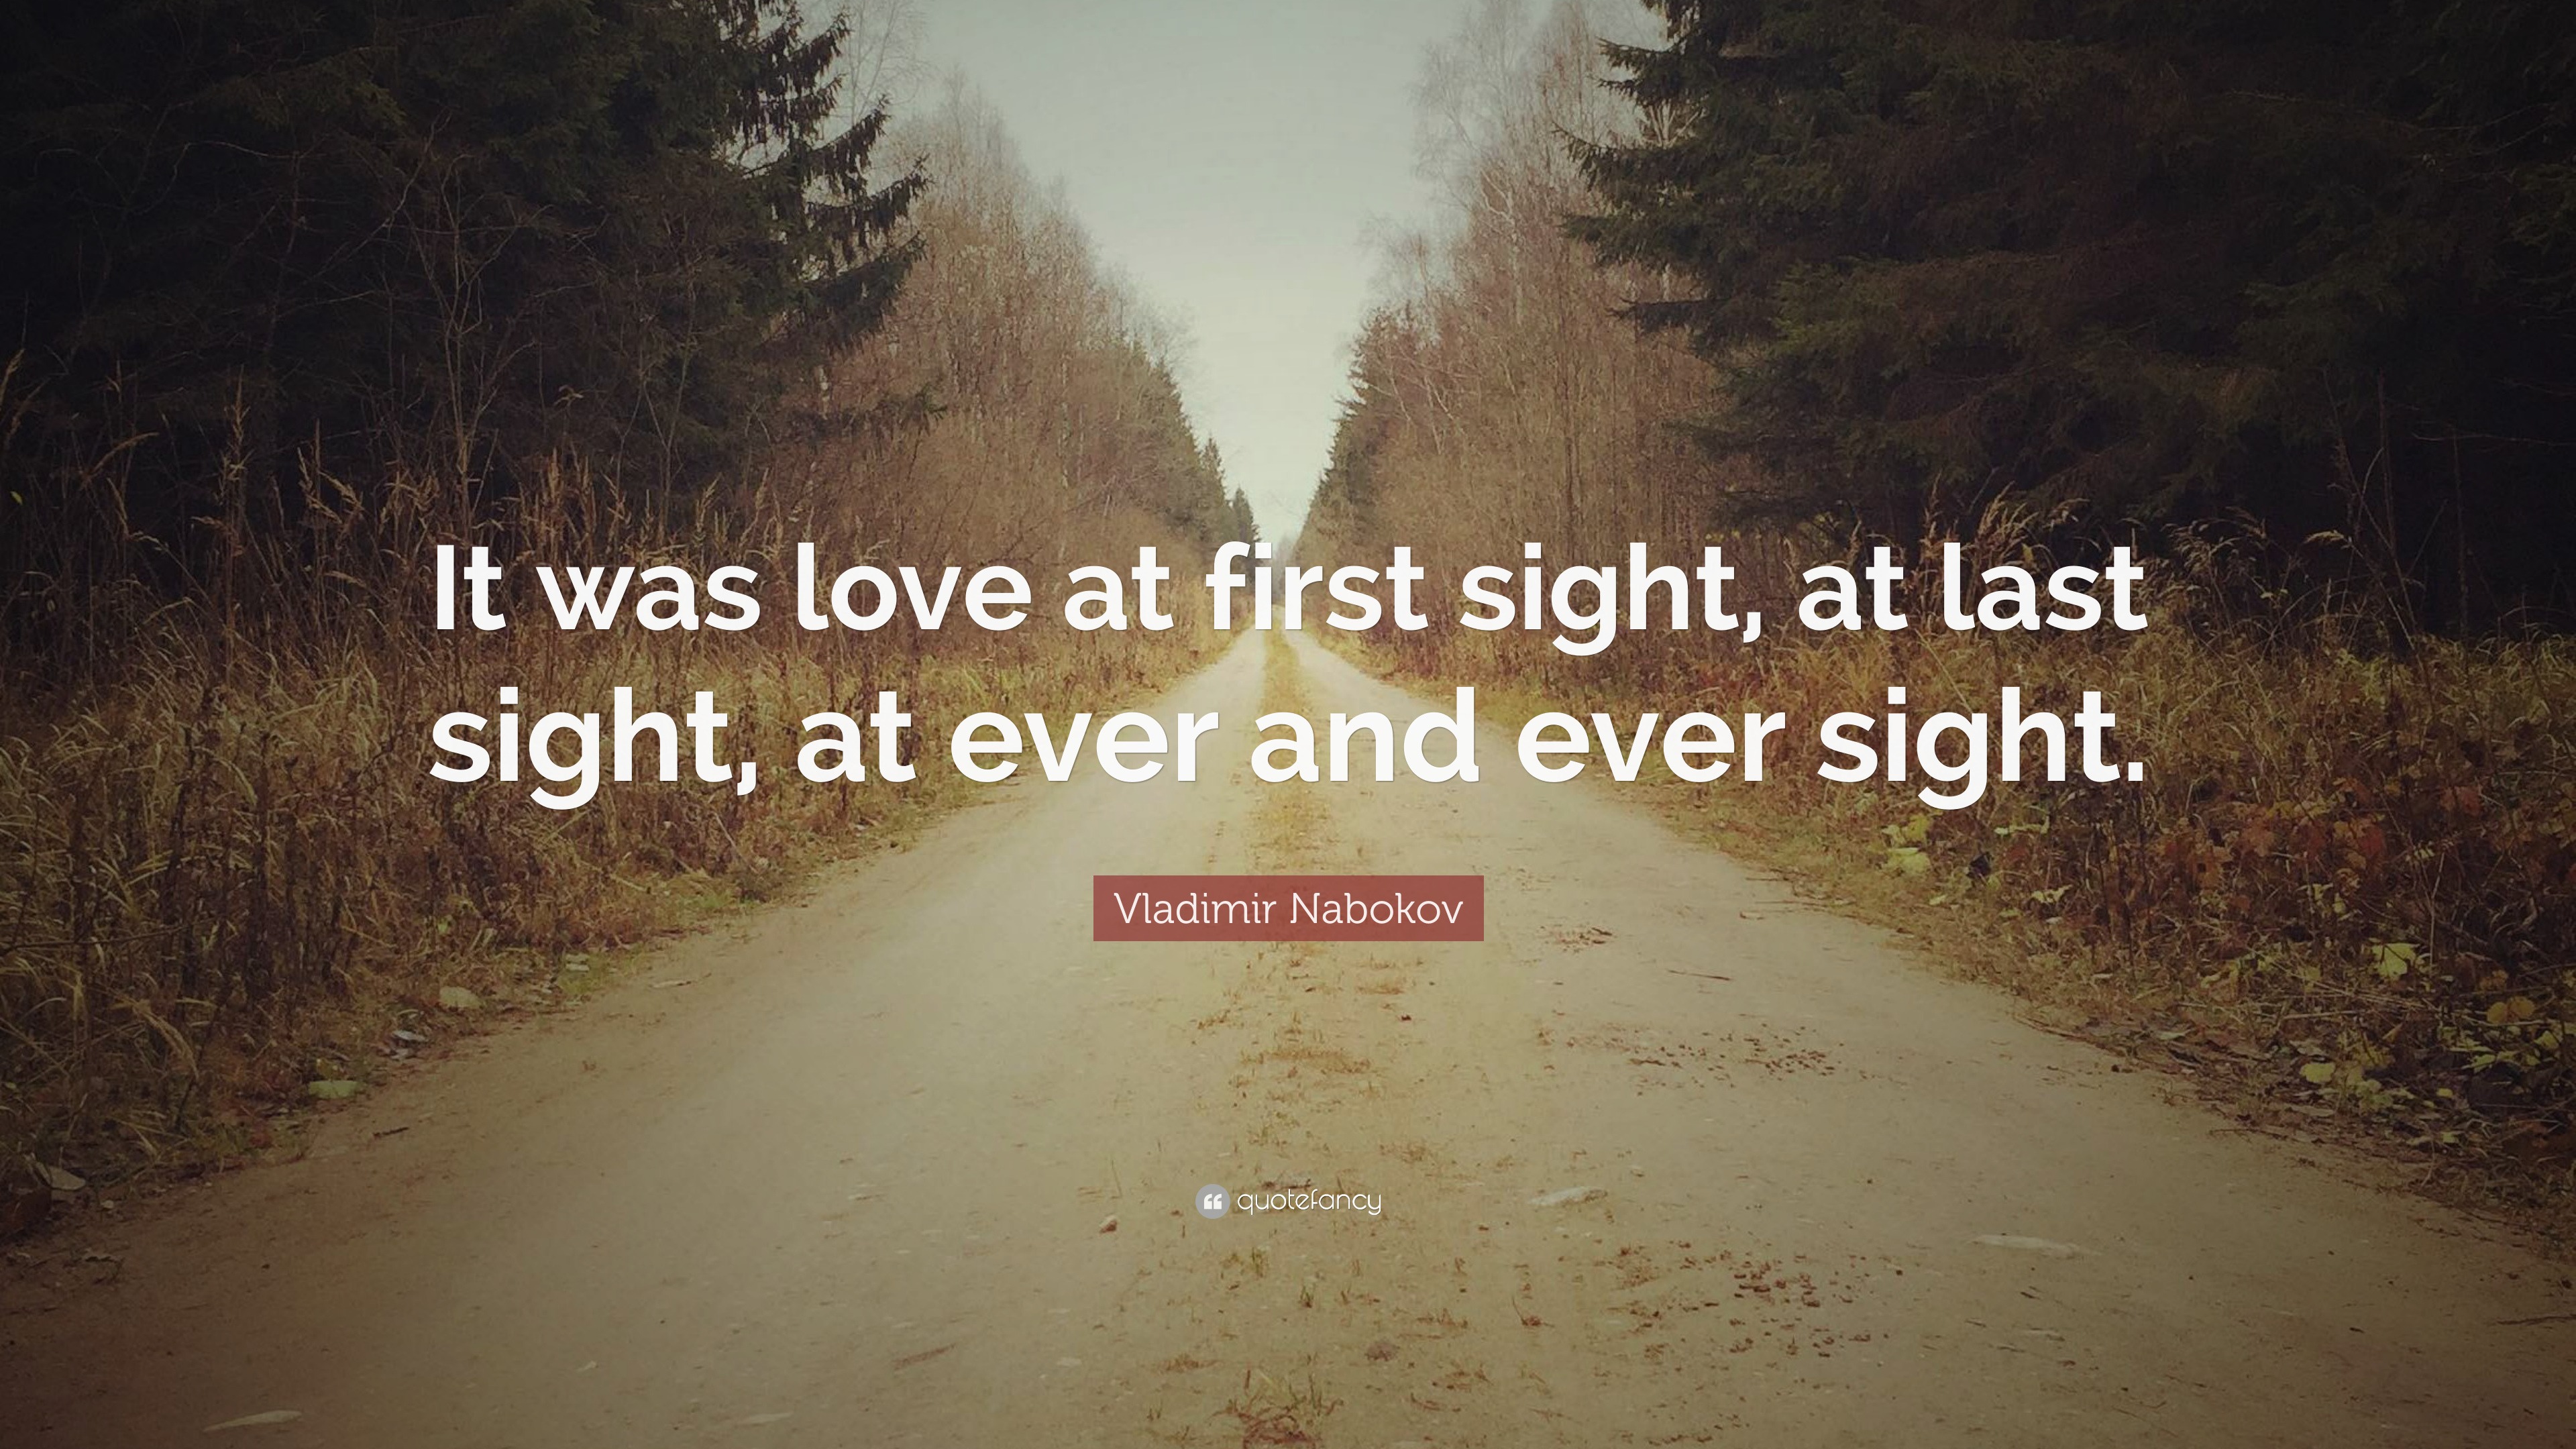 Vladimir Nabokov Quote “It was love at first sight at last sight